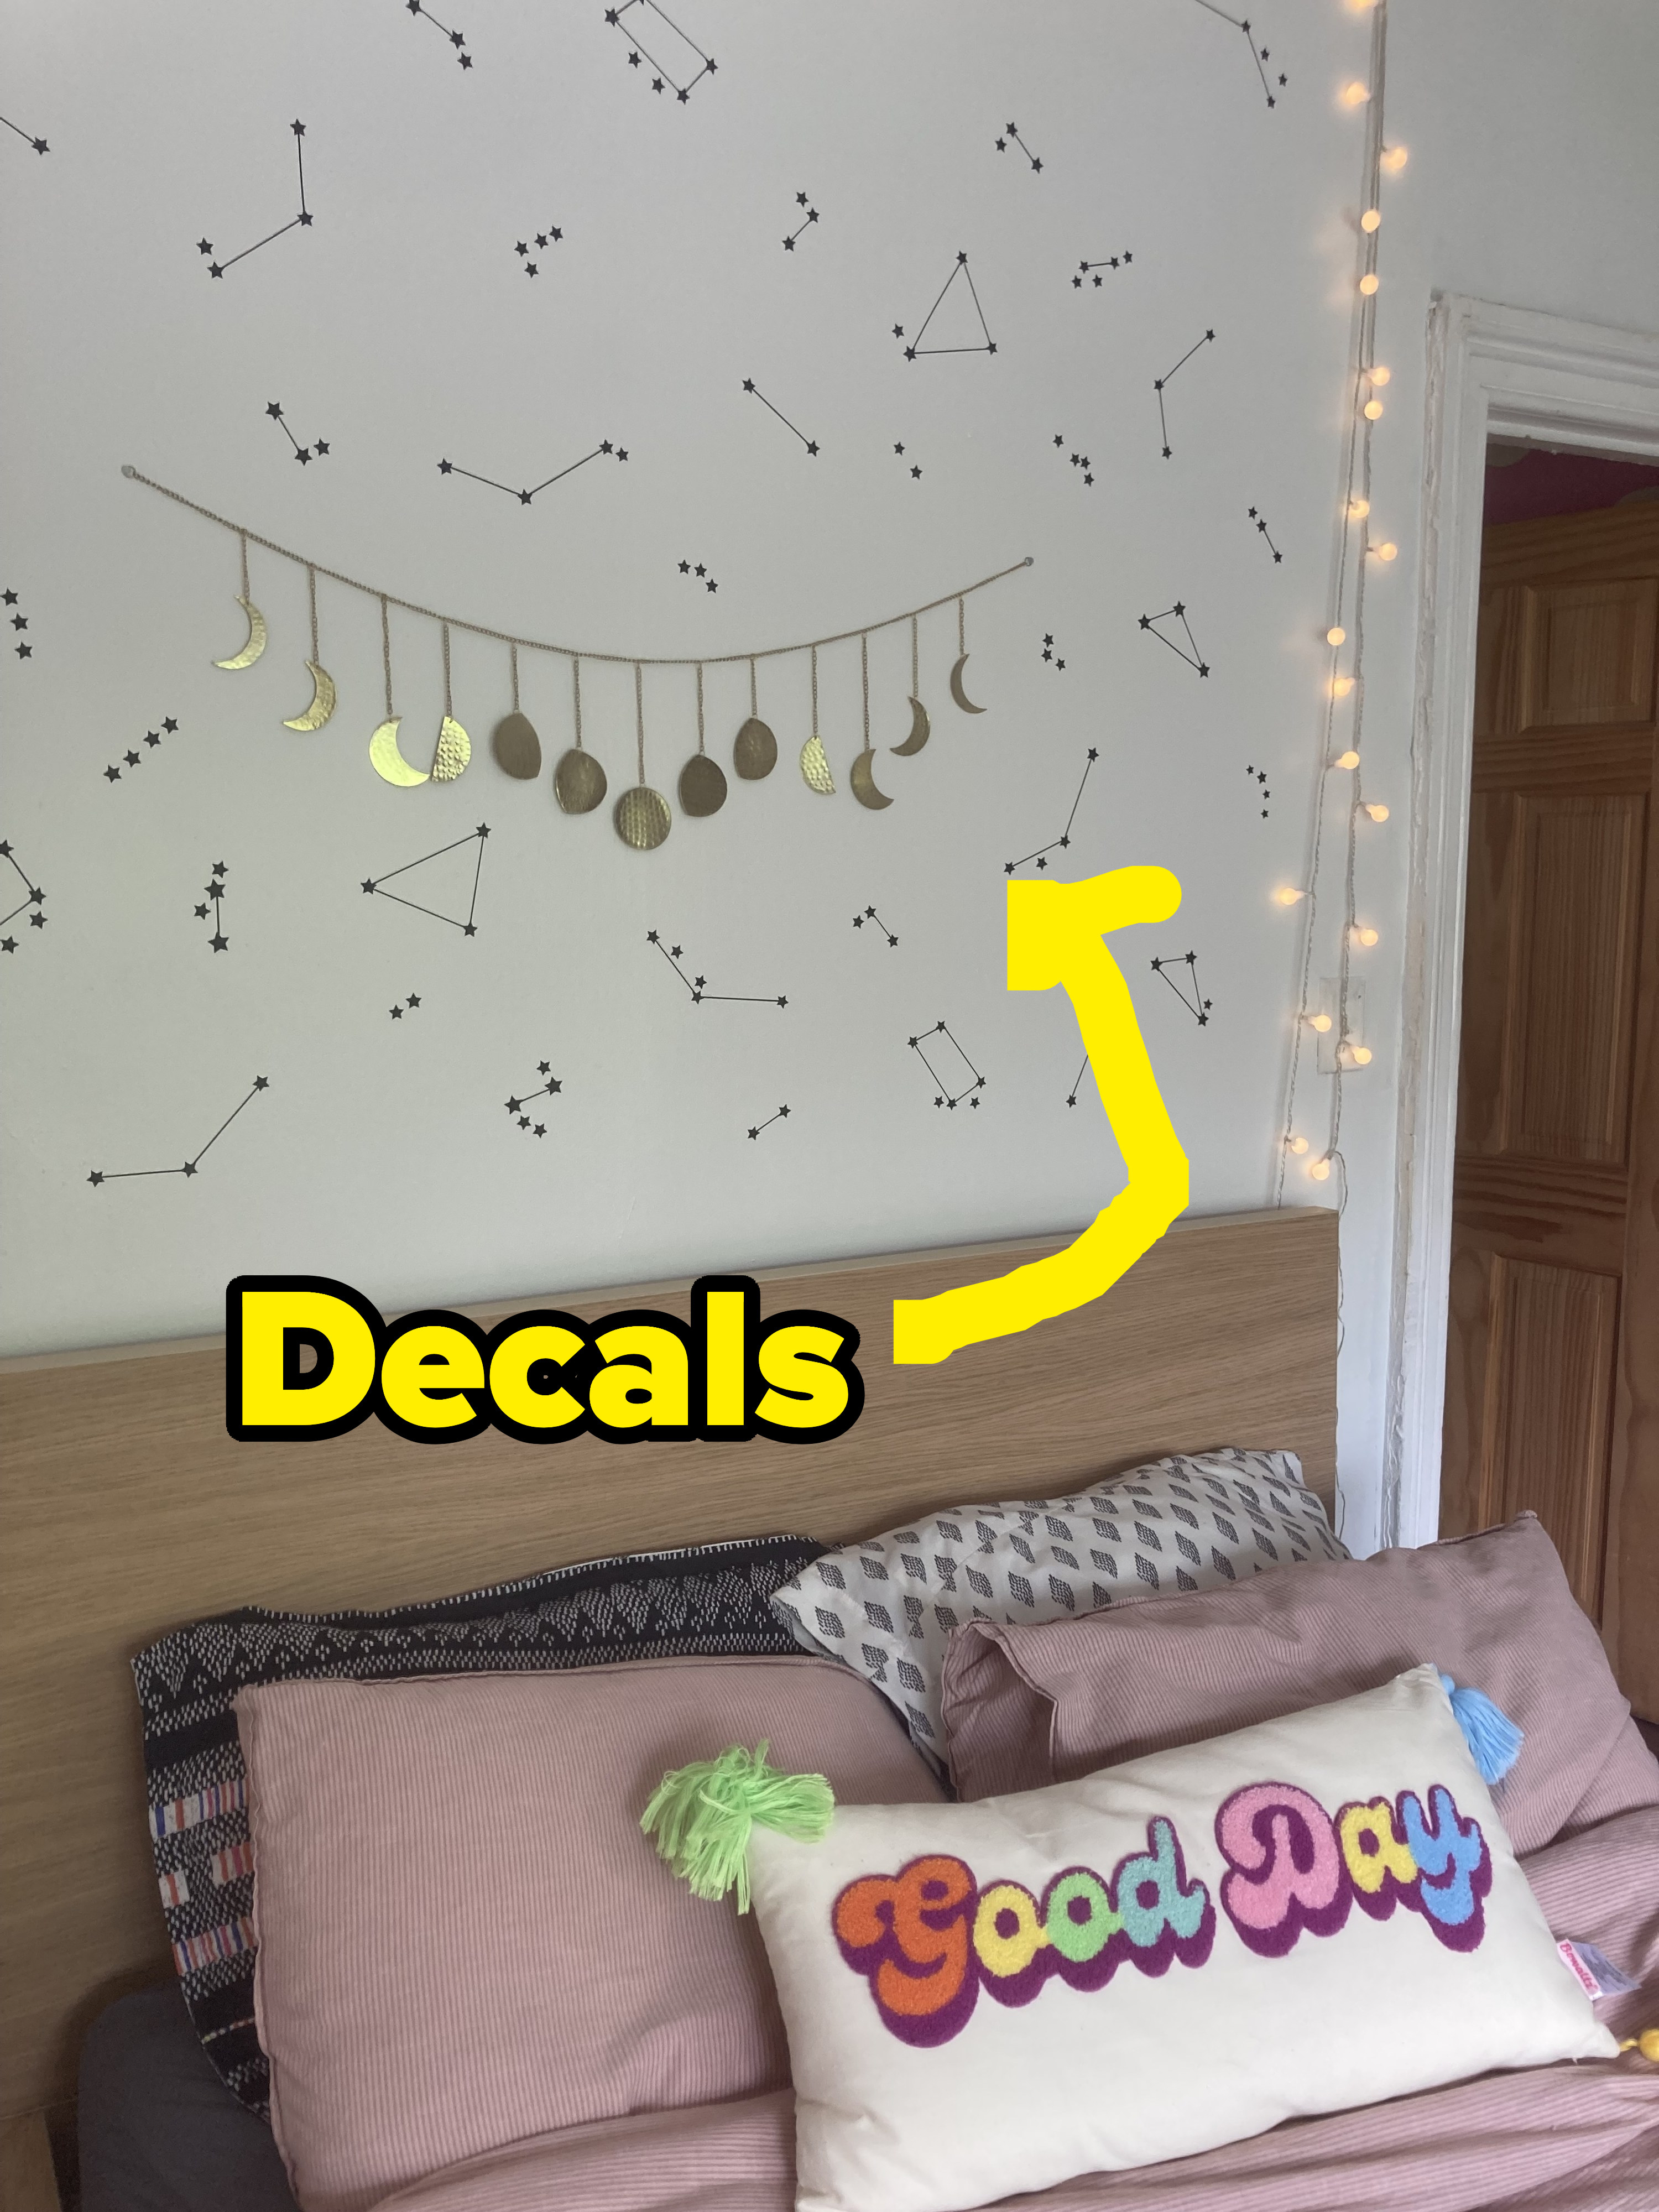 Wall decals over a bed.